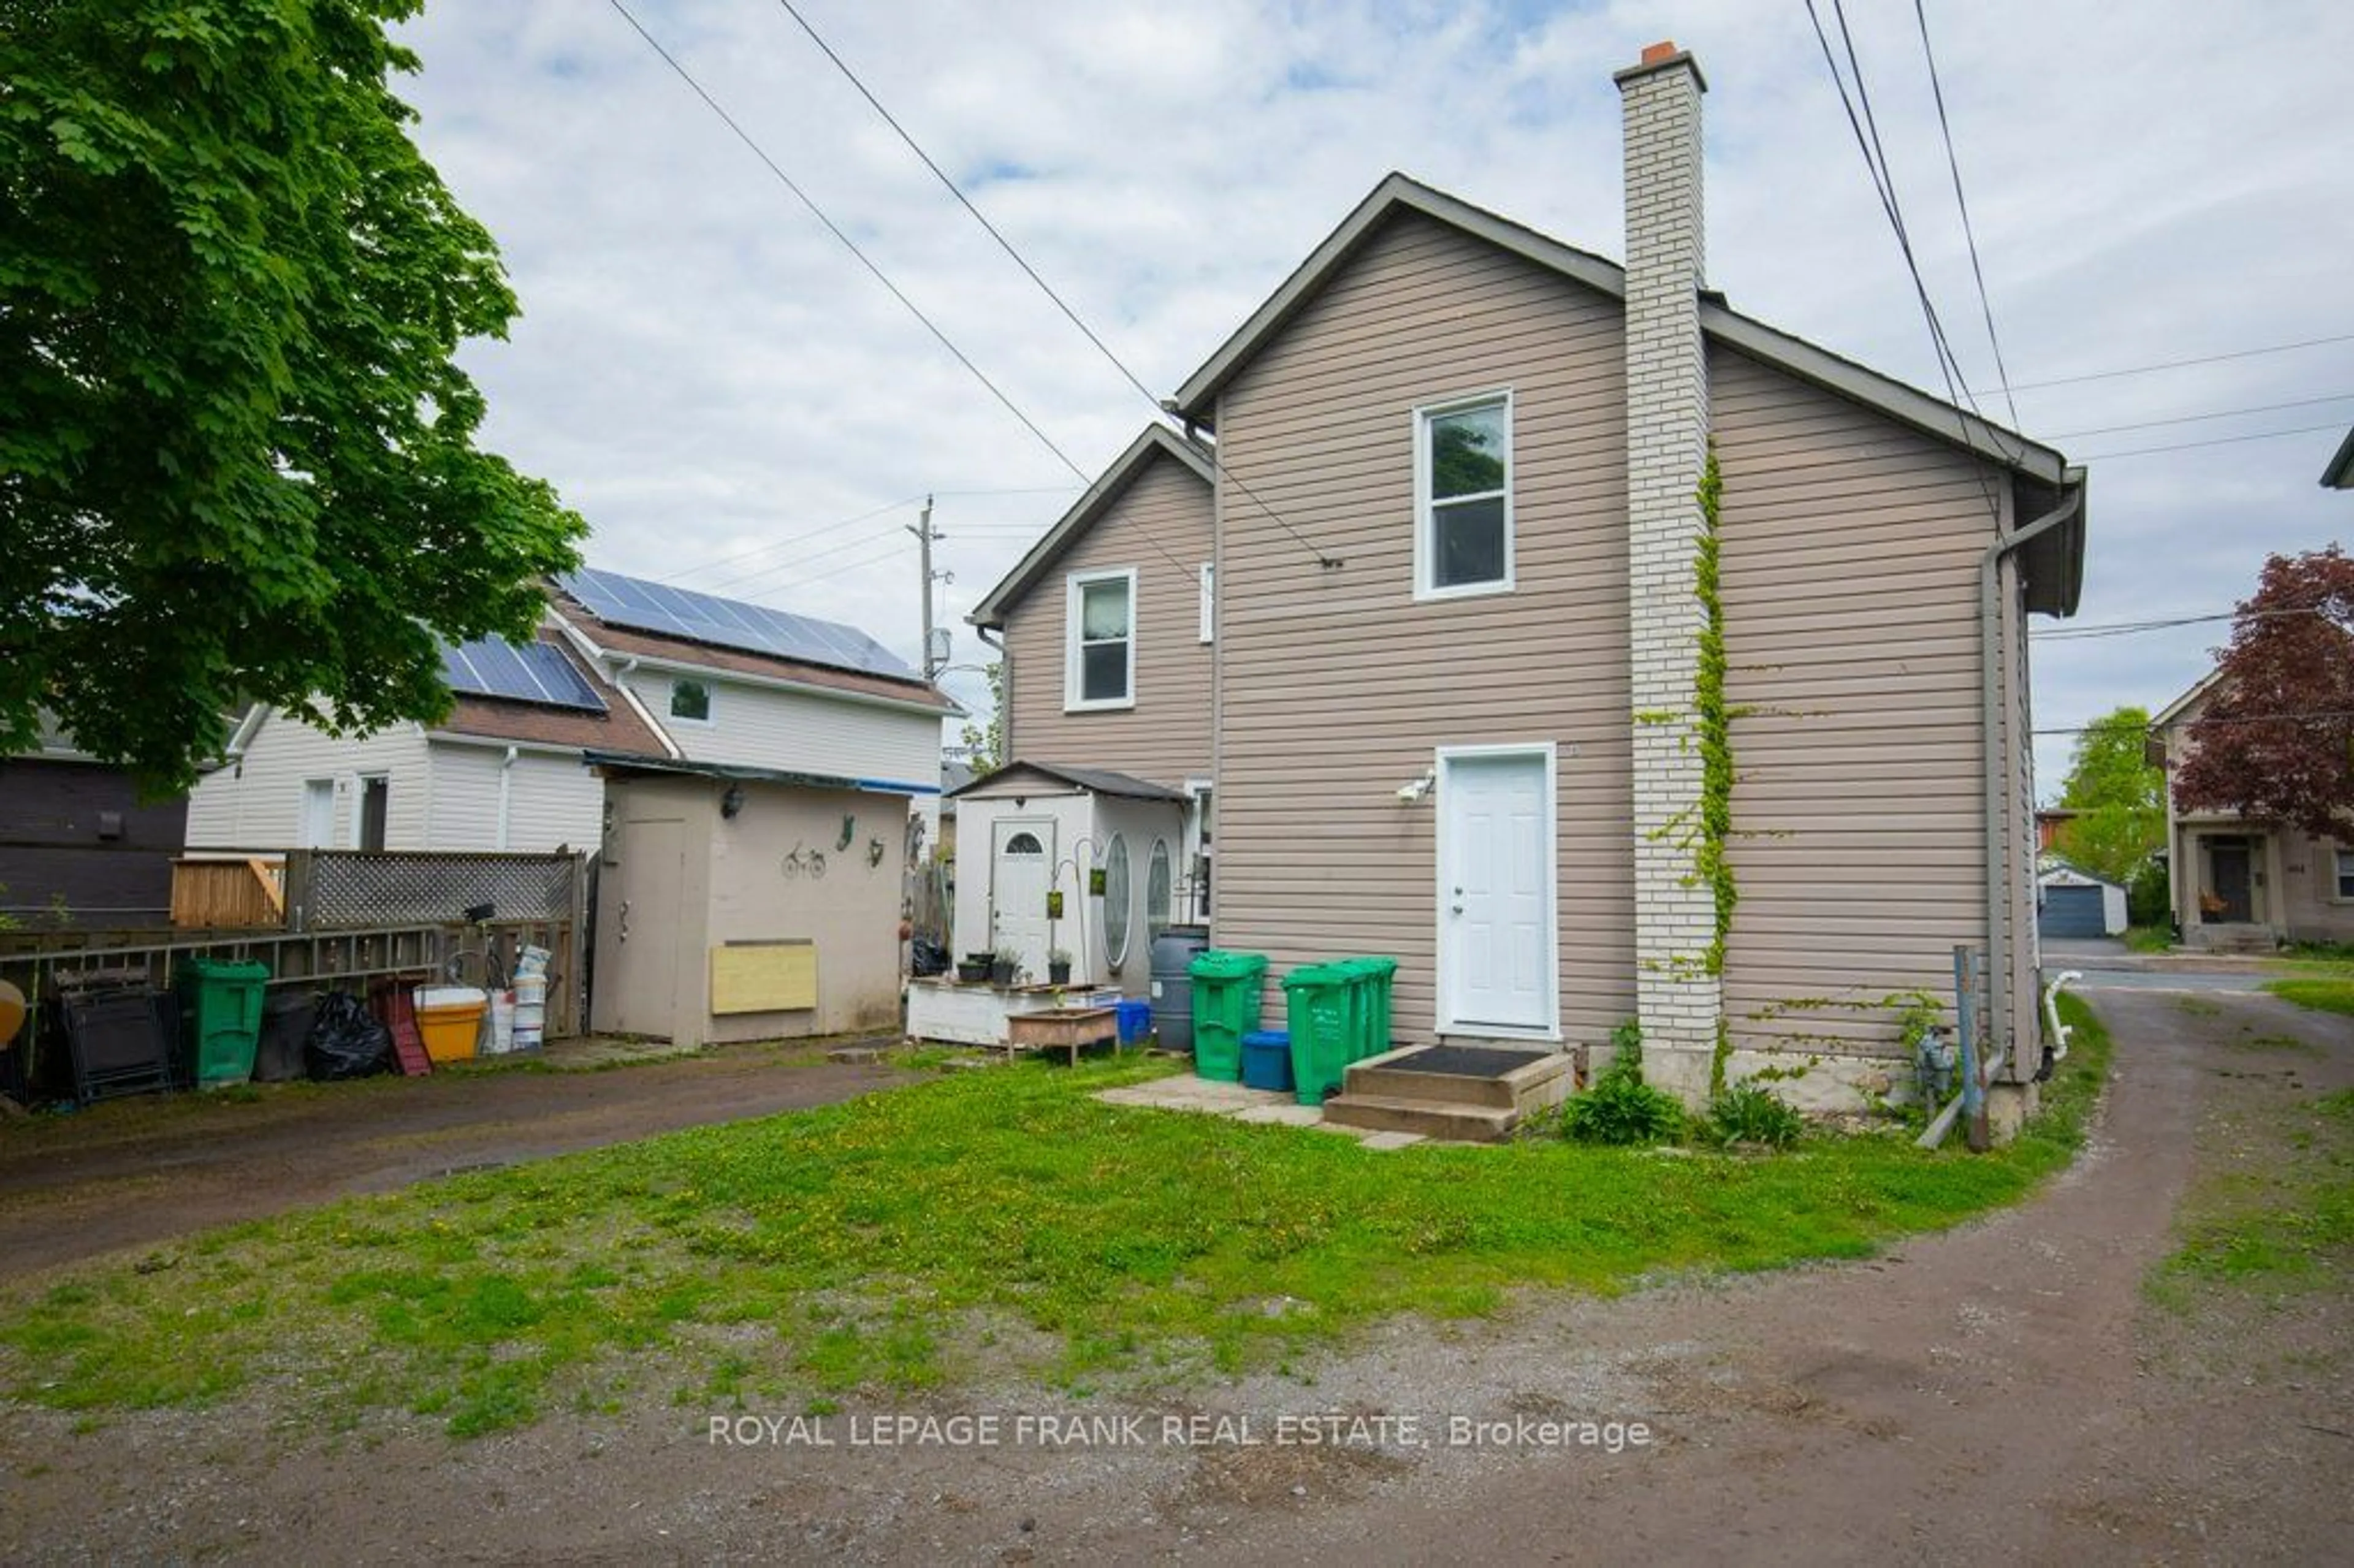 Frontside or backside of a home for 485-487 Sherbrooke St, Peterborough Ontario K9J 2P2